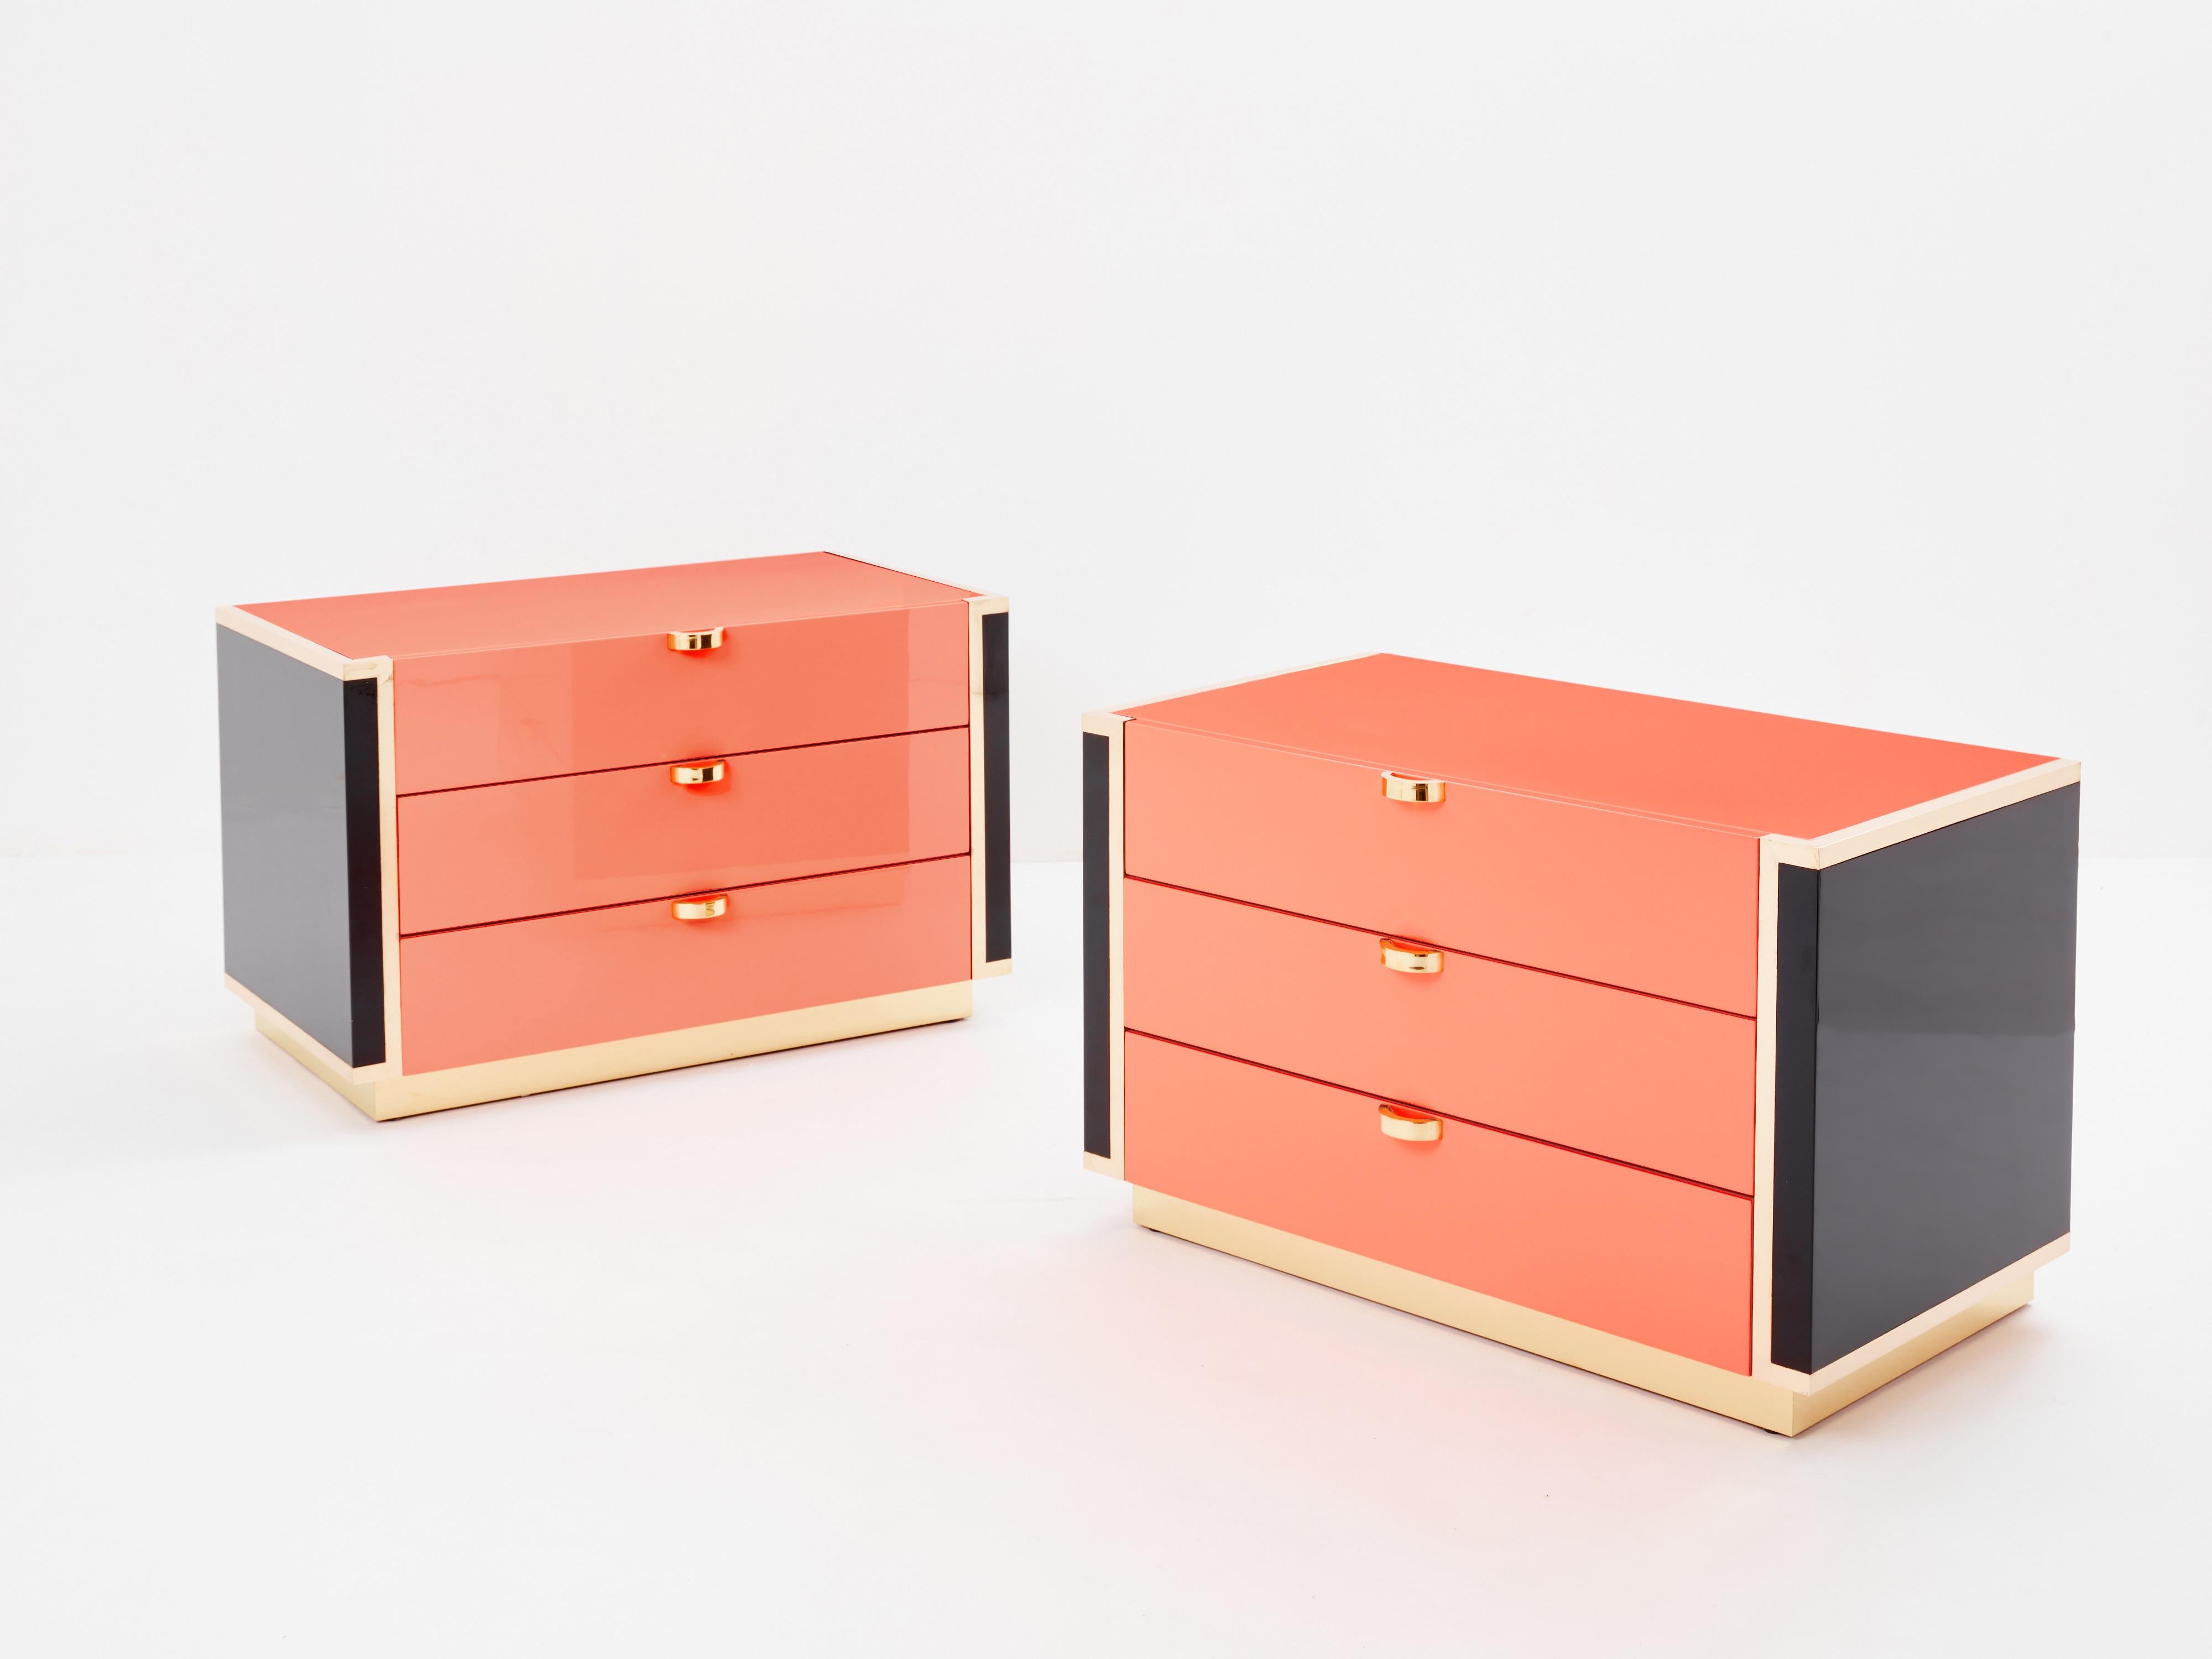 These twin nightstands chest of drawers in a beautiful peach pink and black lacquer could serve in a bedroom, or as sturdy end tables in a living room or office, or else as small commodes in a dressing room. The crisp mix of peach and black lacquer